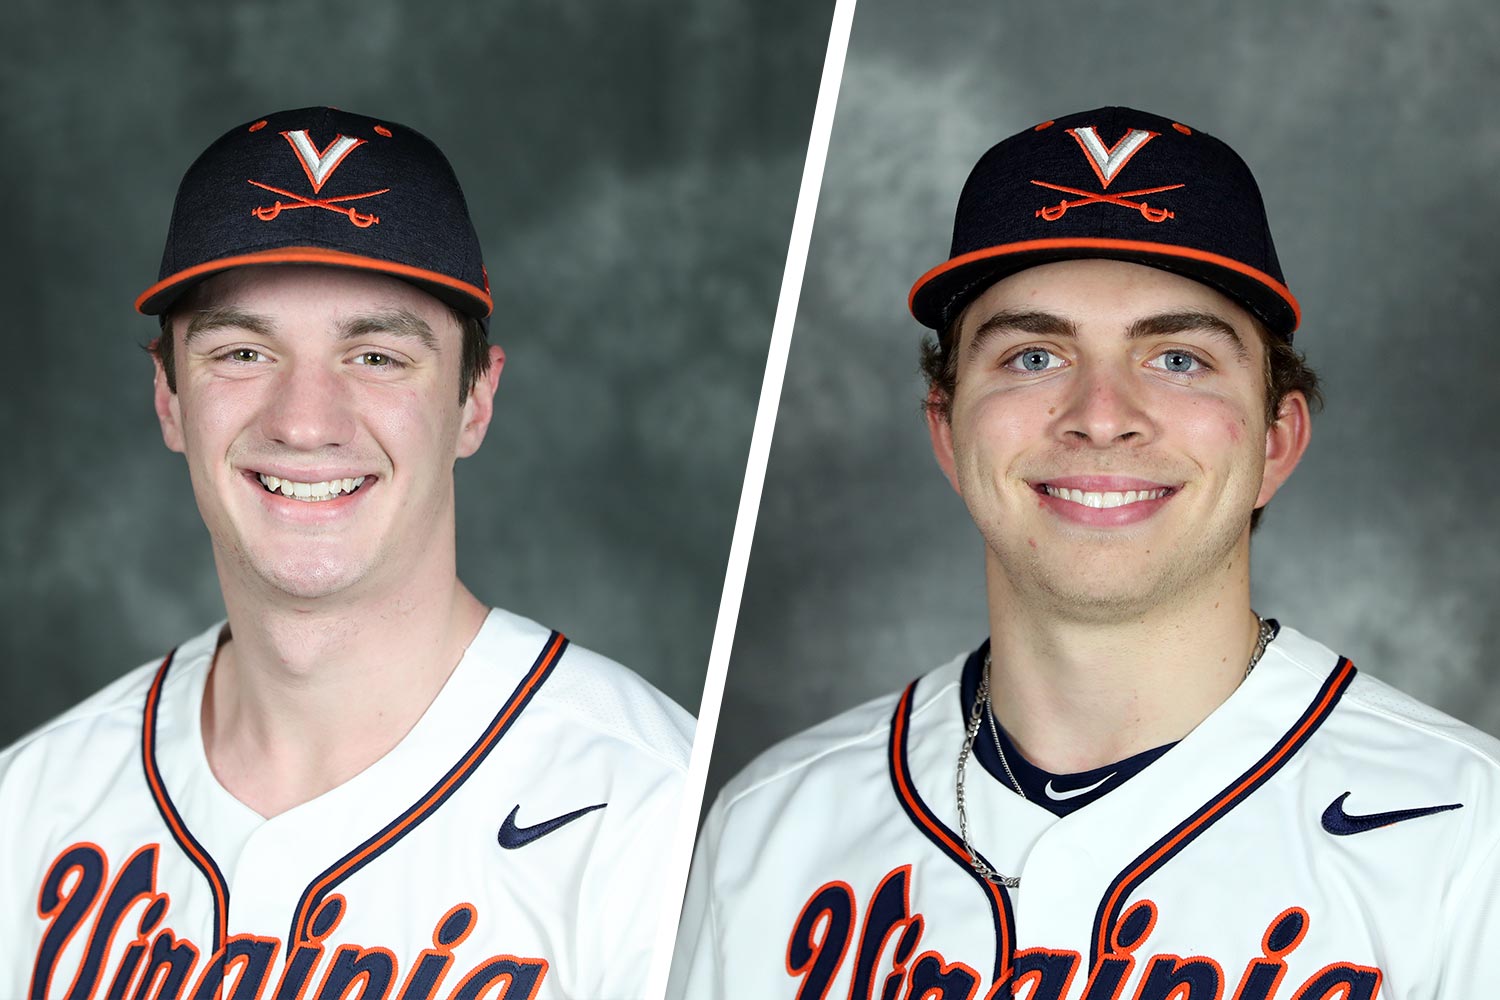 While at UVA together, Sean Doolittle hit more homers than Ryan